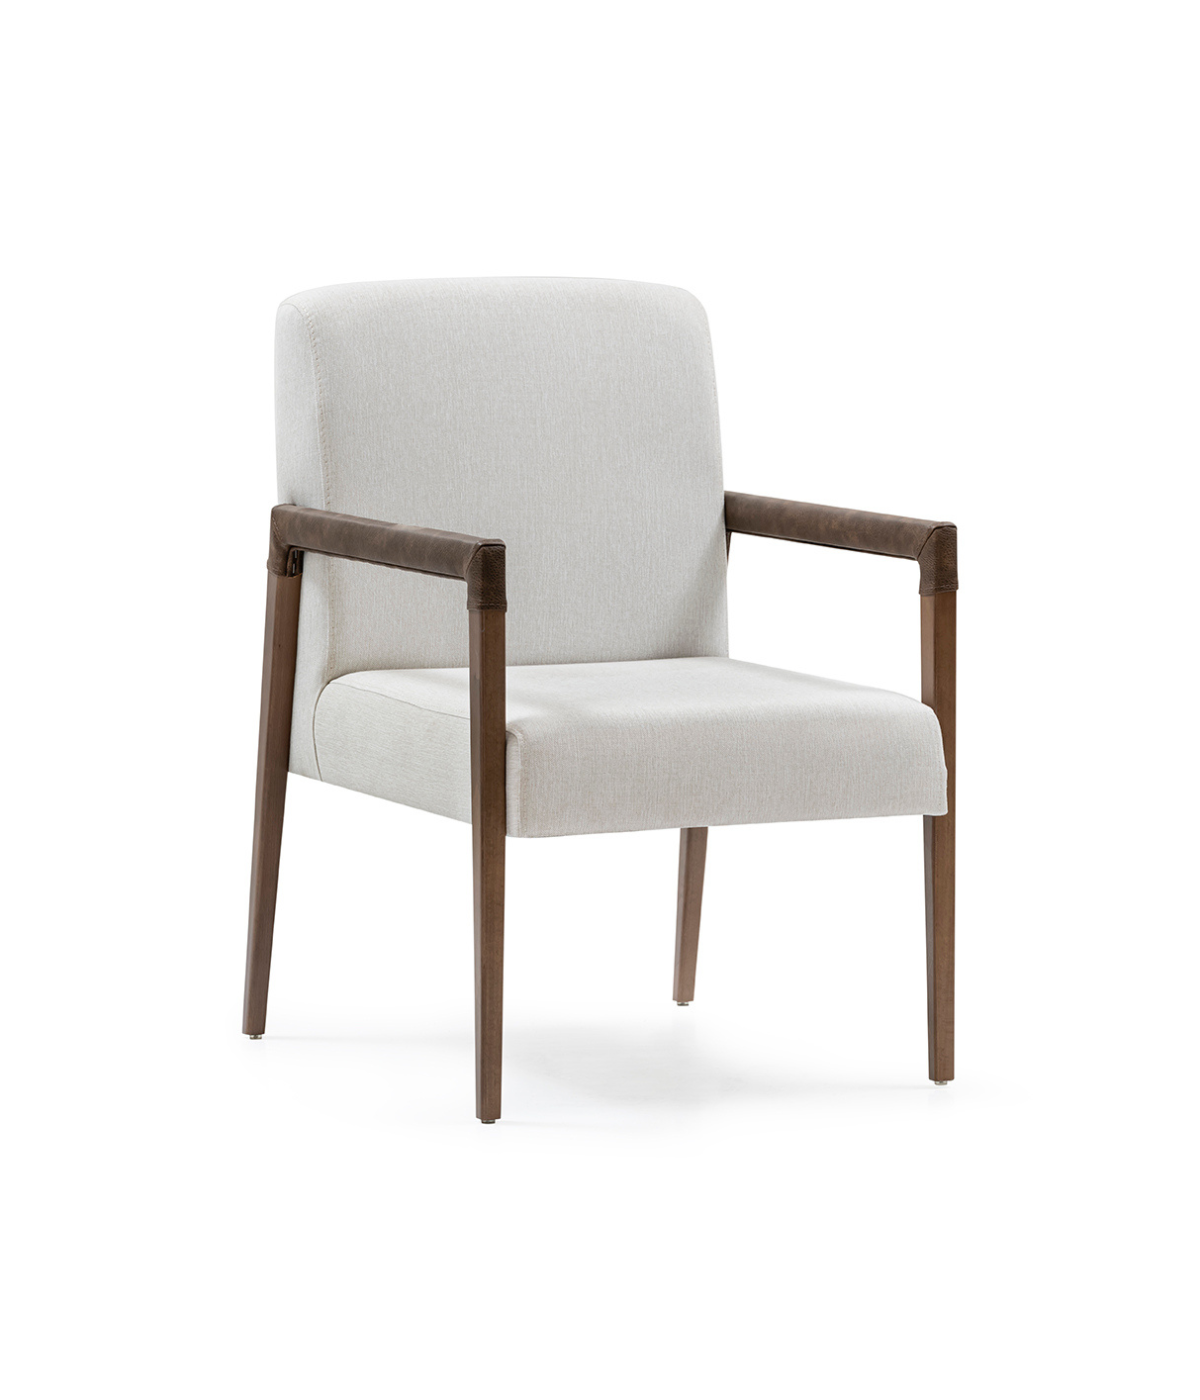 Anah Dining Chair - Dala Luxe